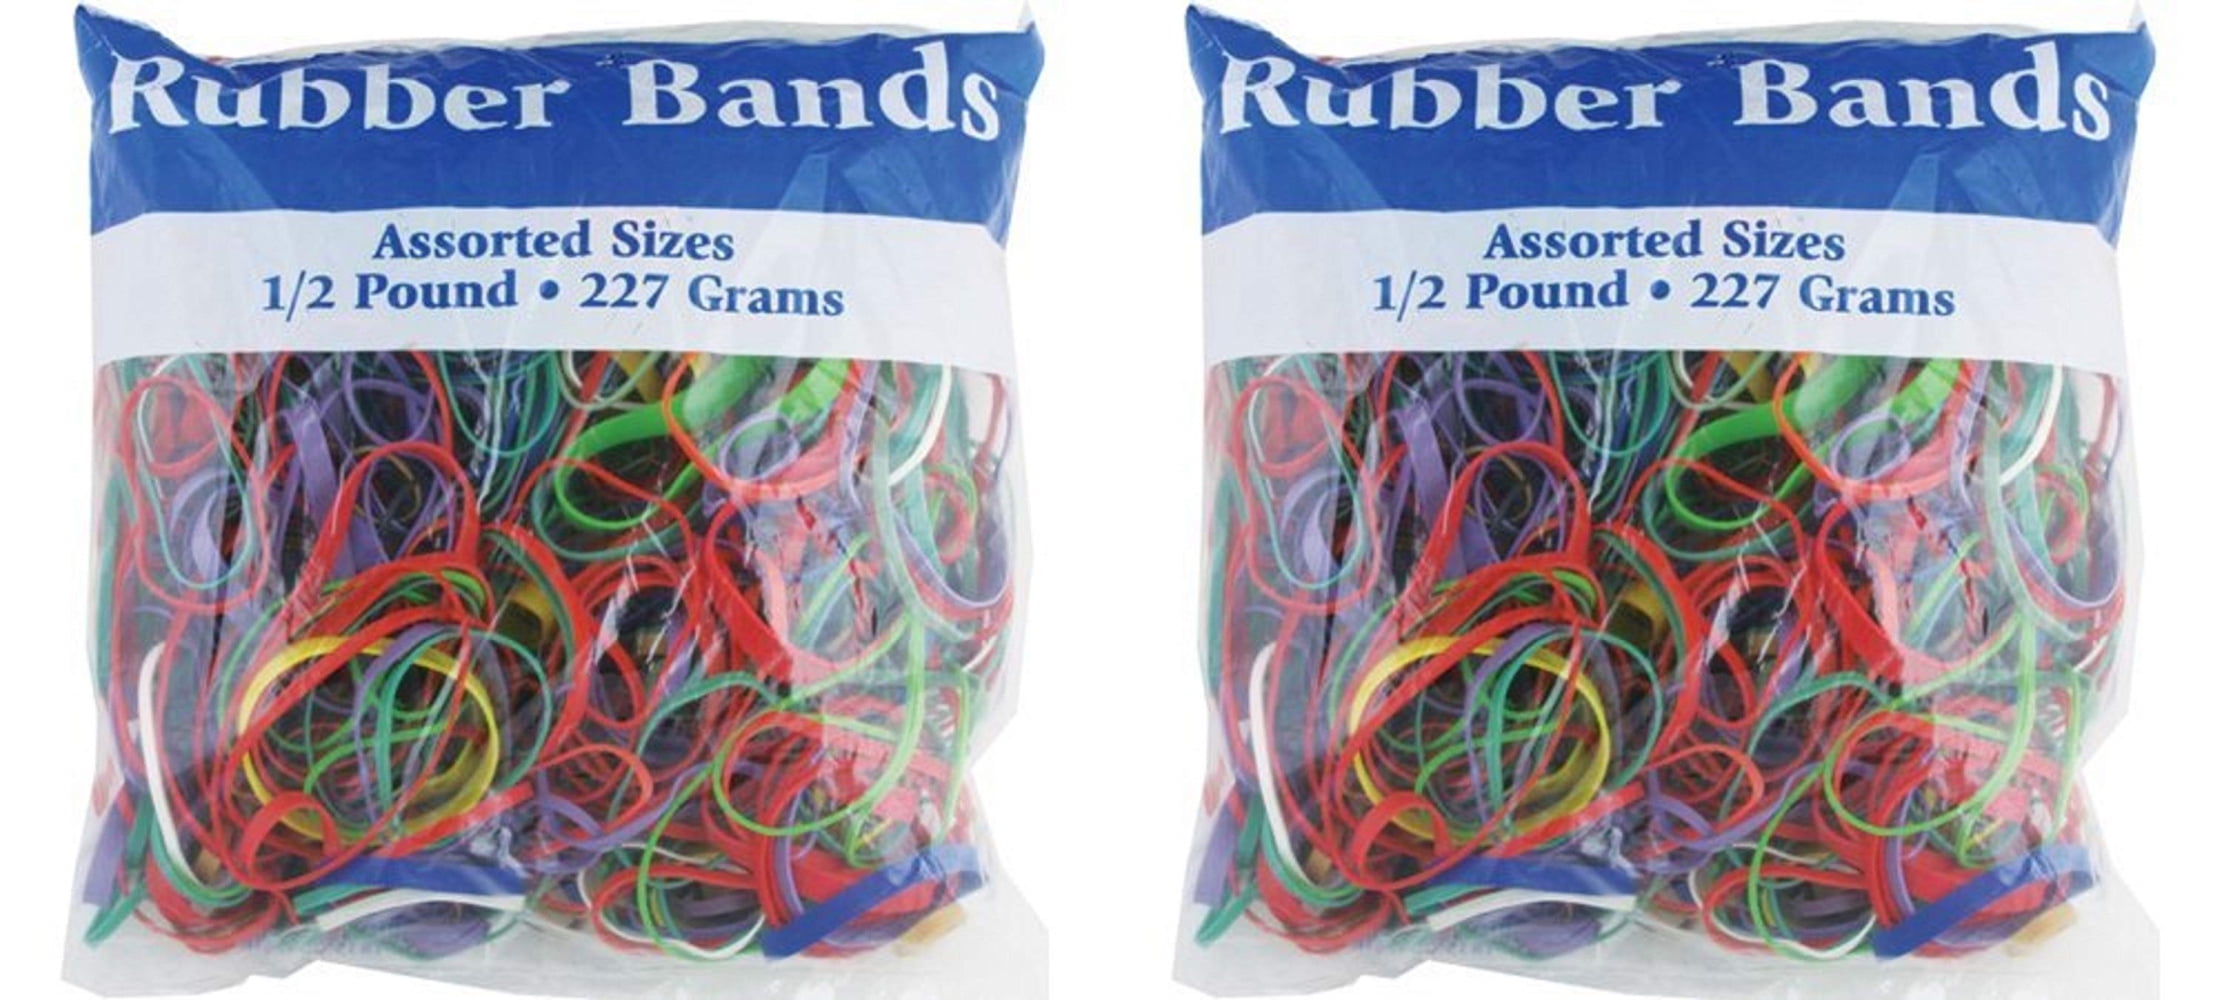 Essentials Assorted Size Rubber Bands 4 x 454g Pack 